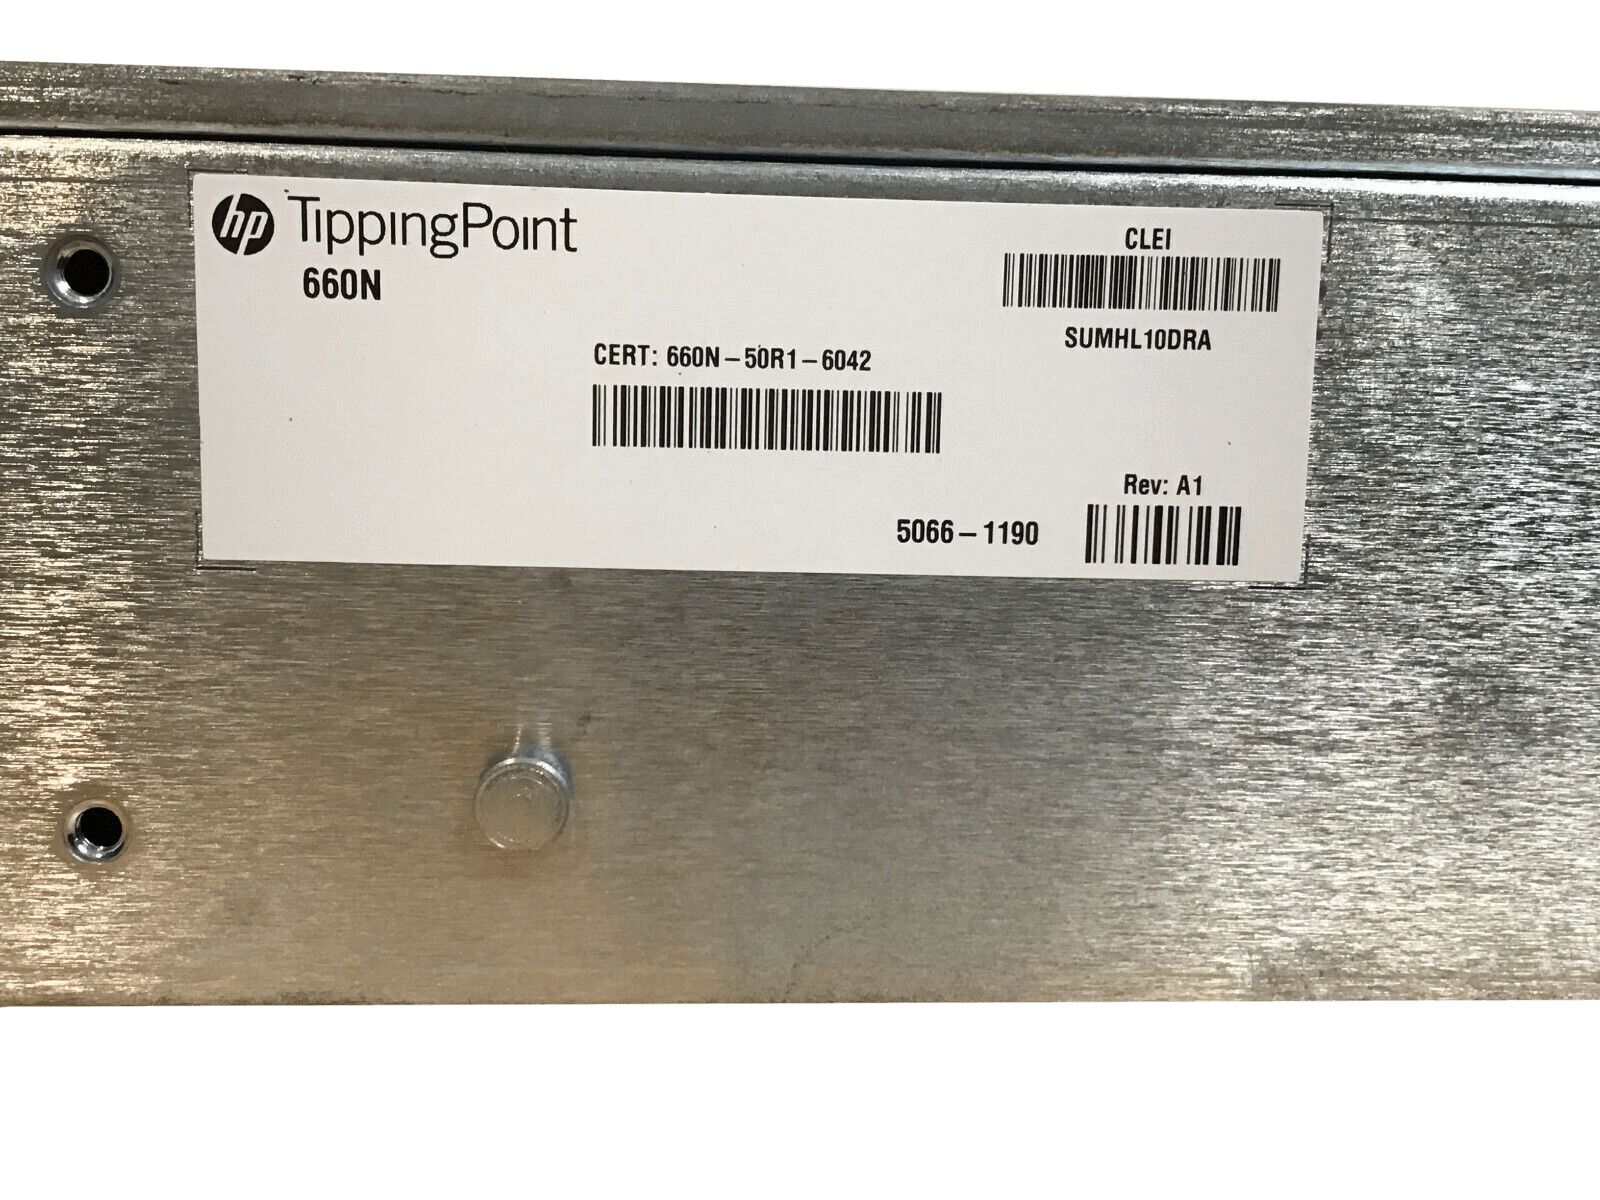 HP JC021A TippingPoint 660N IPS 2500N-50R1-6006 Intrustion Prevention System 10x RJ45 10x SFP 2x XFP.